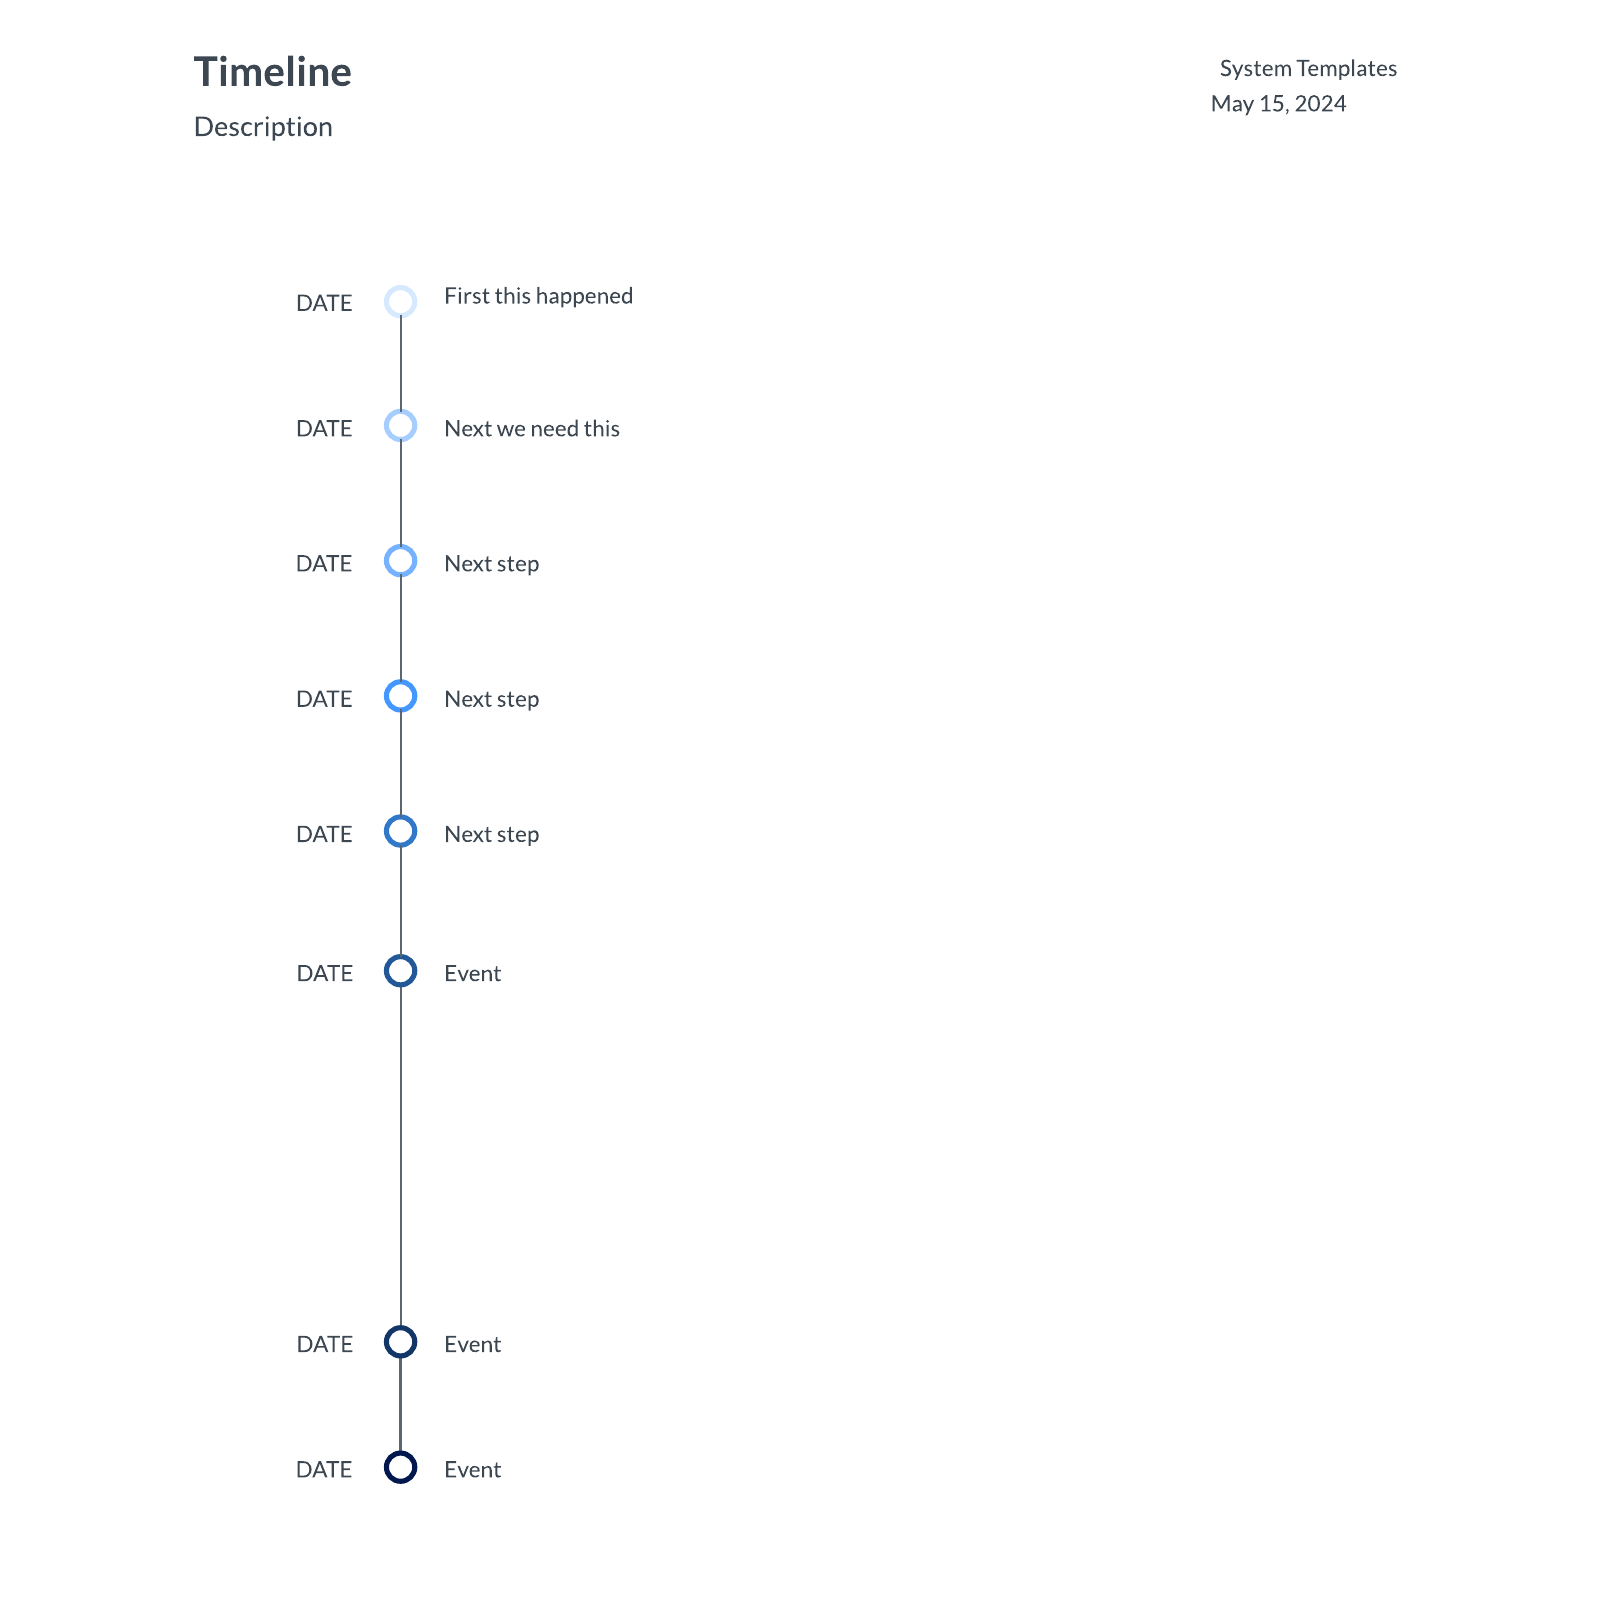 Vertical Timeline example